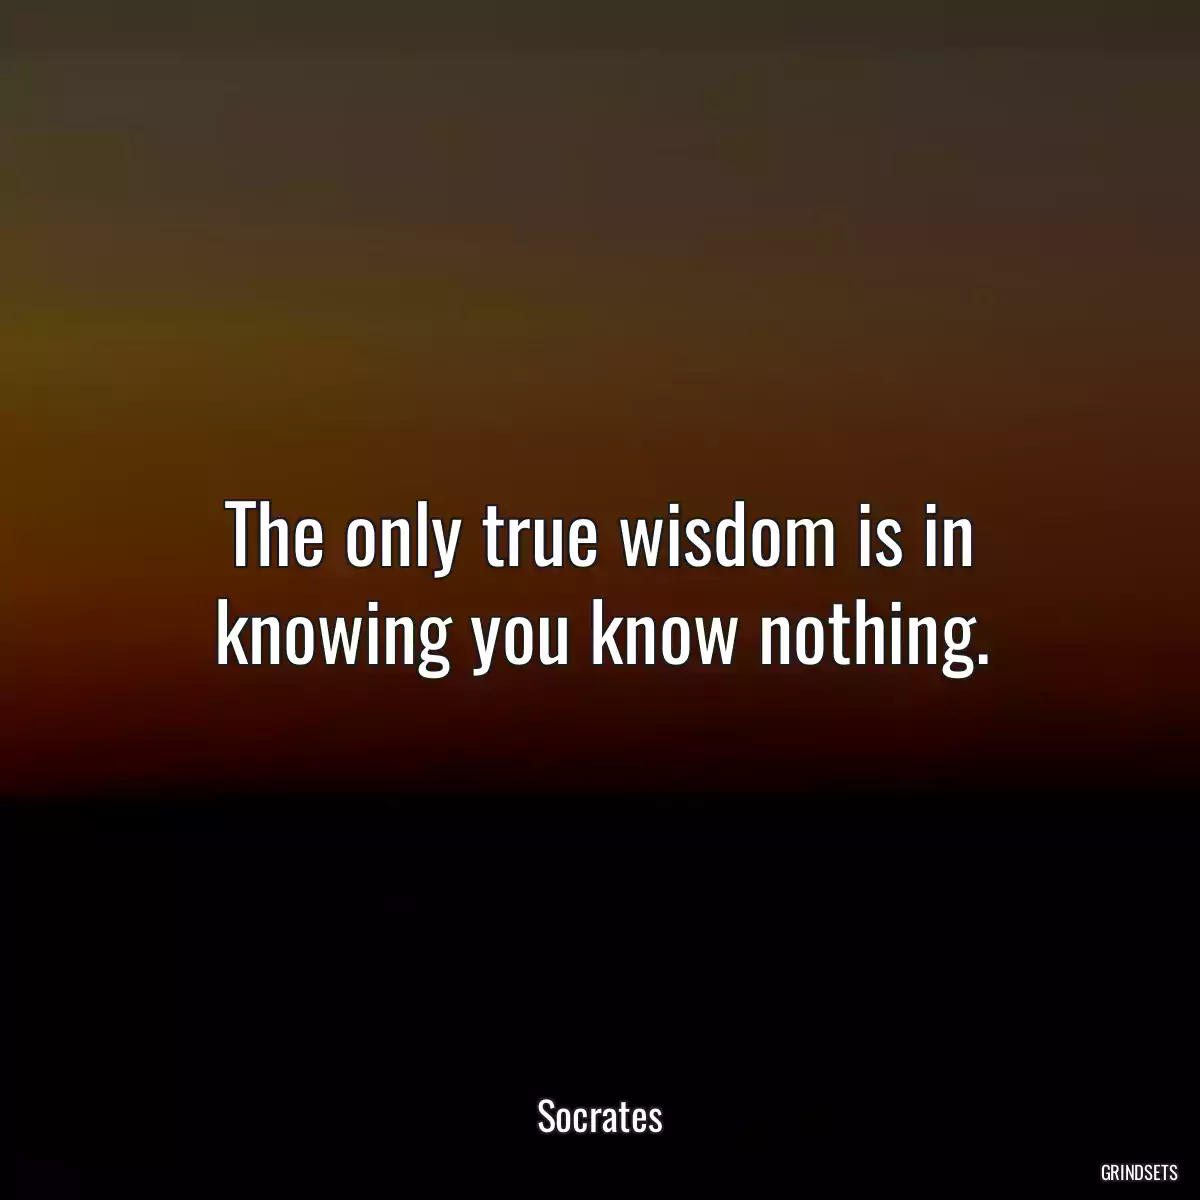 The only true wisdom is in knowing you know nothing.